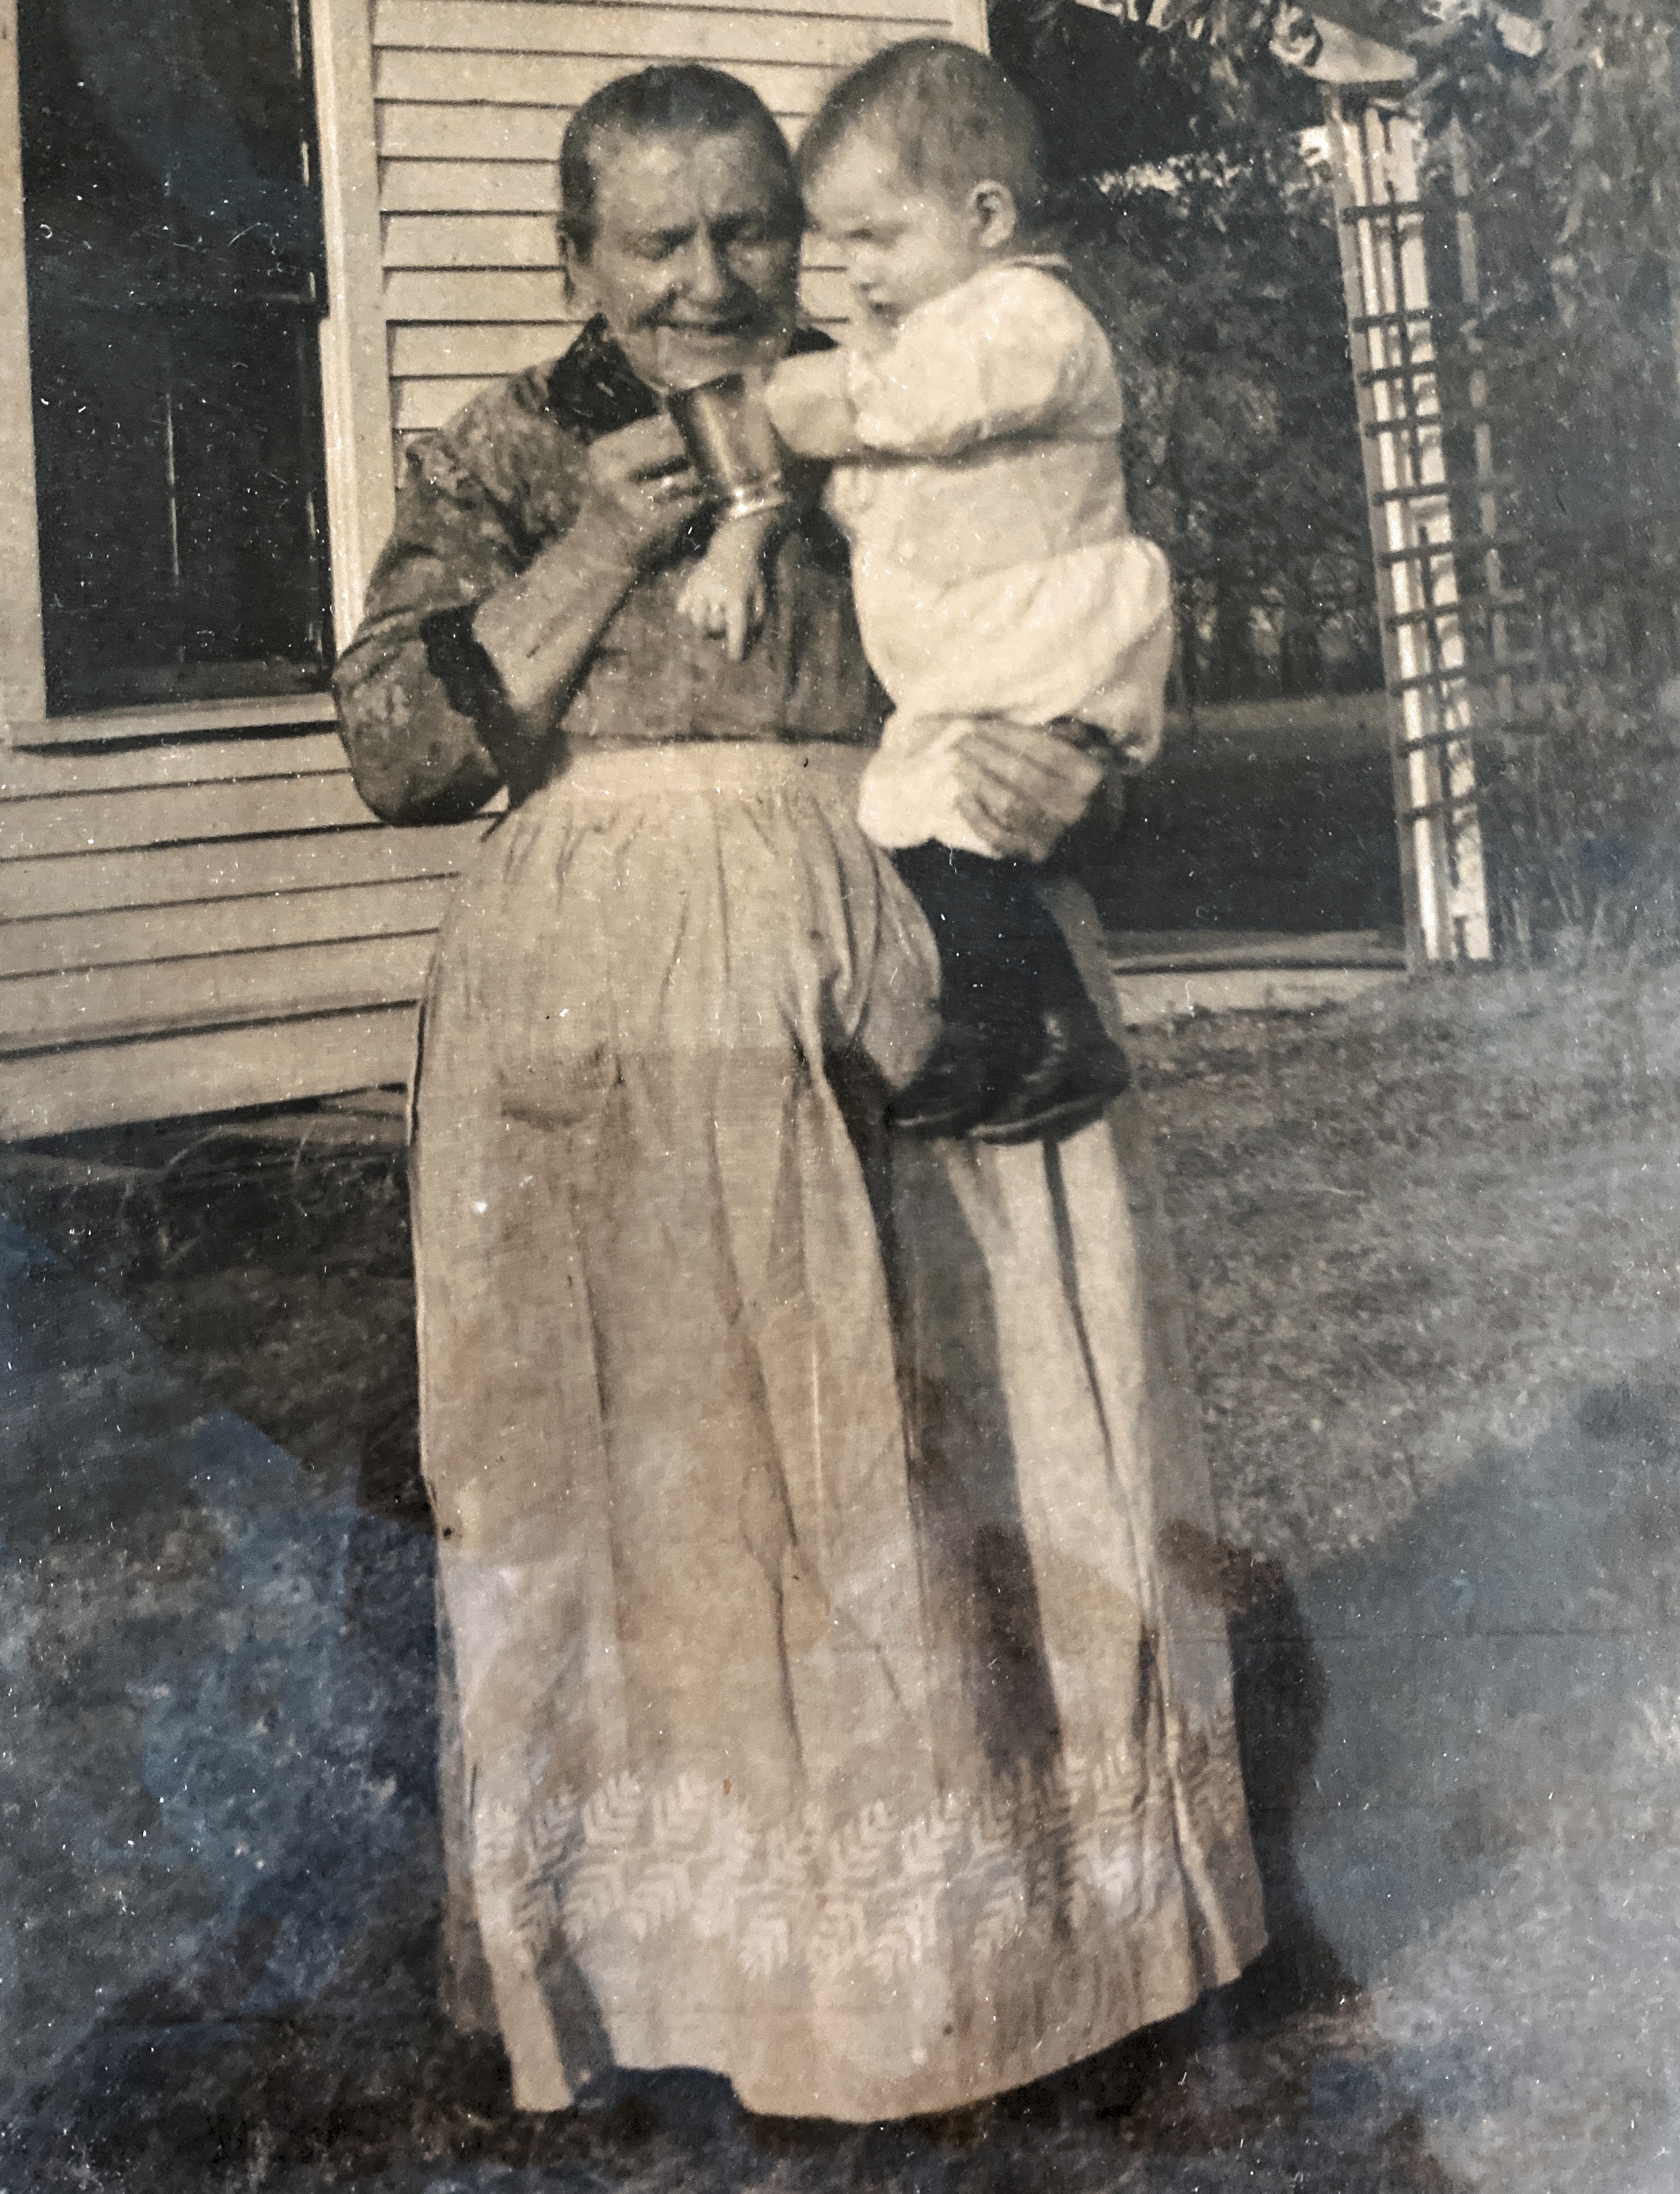 Johanna Meaney Haney with Francis William Haney at his home in Richland, Nebraska on his first birthday, October 6, 1917